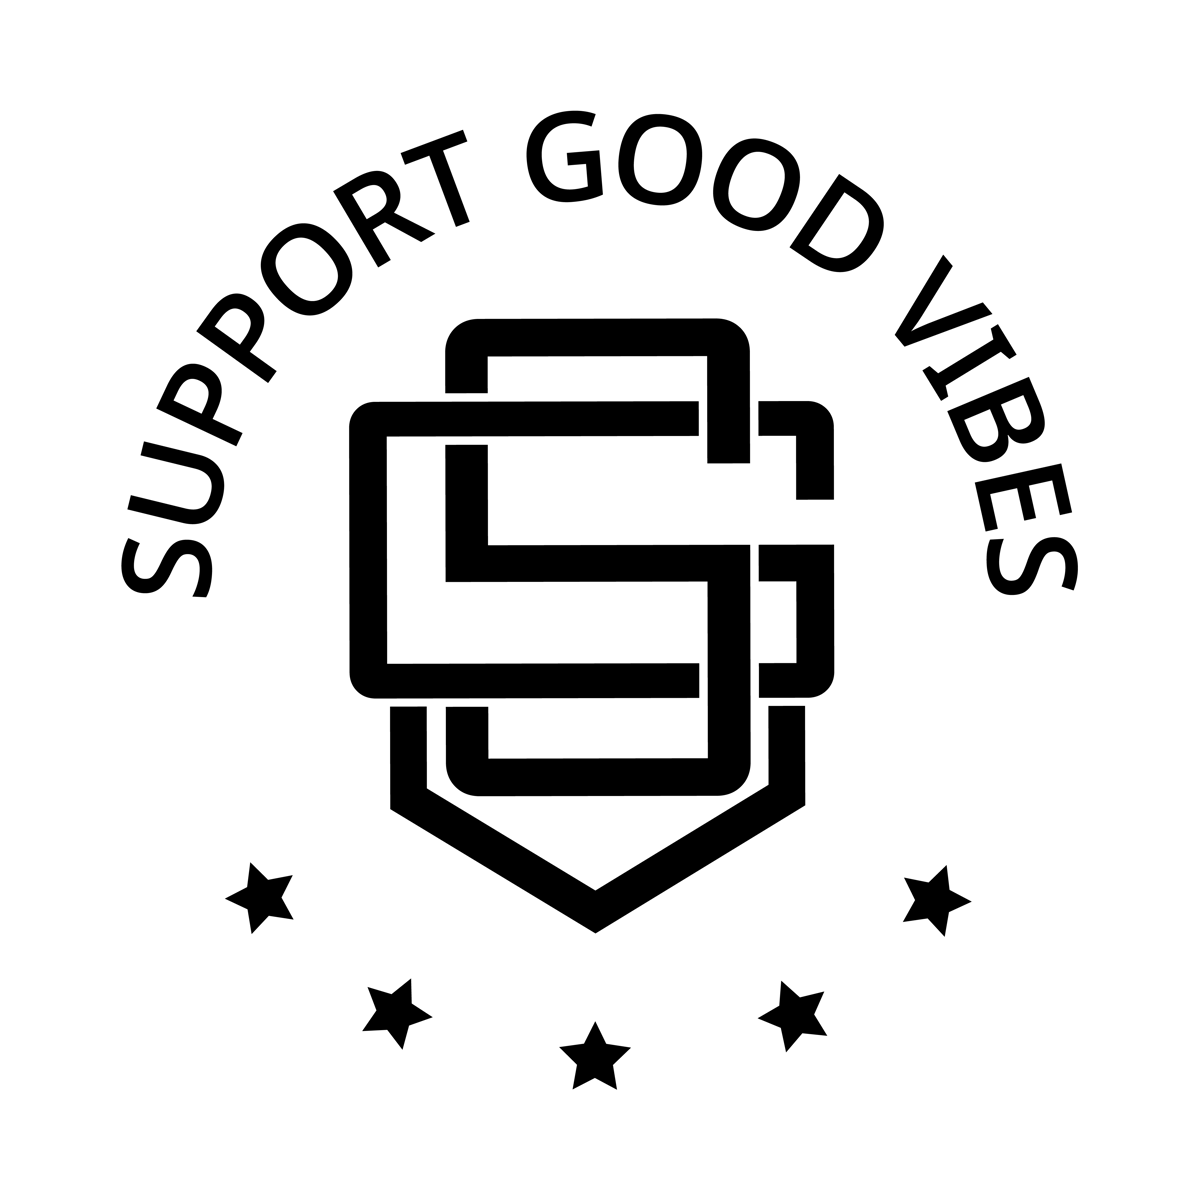 Support Good Vibes Tank Top